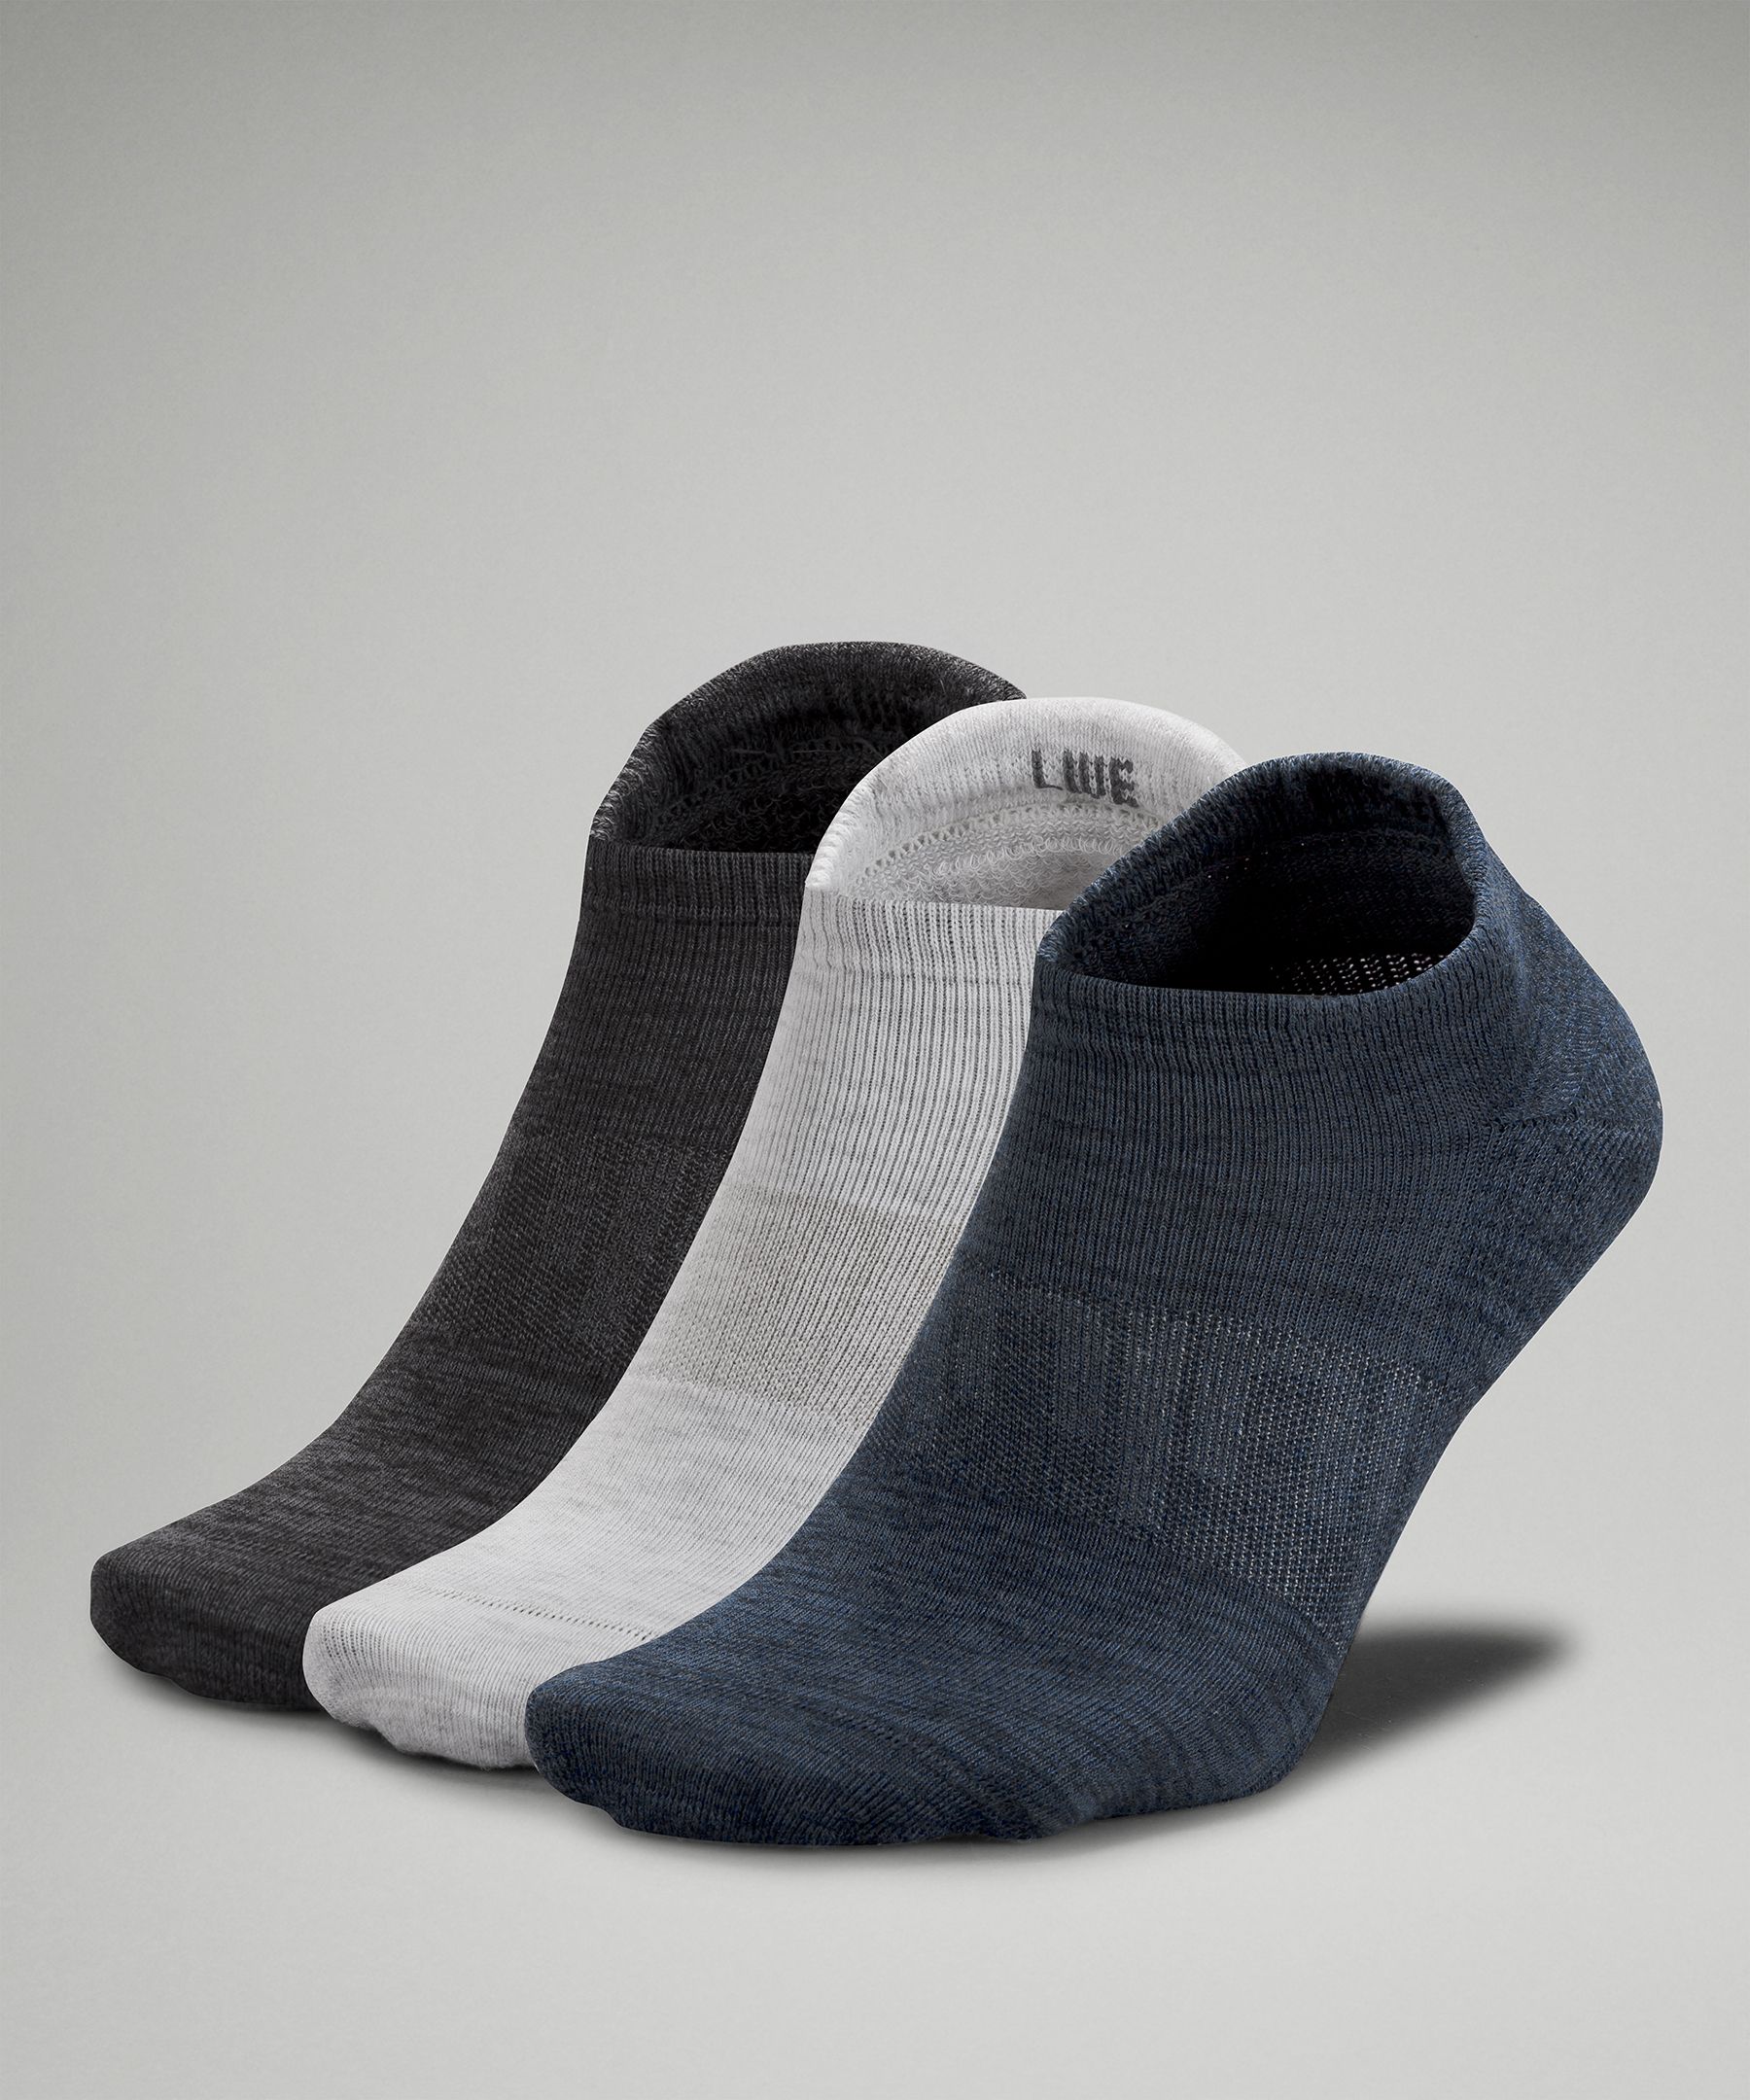 Lululemon Daily Stride Low-ankle Socks 3 Pack In Iron Blue/white/heather Grey